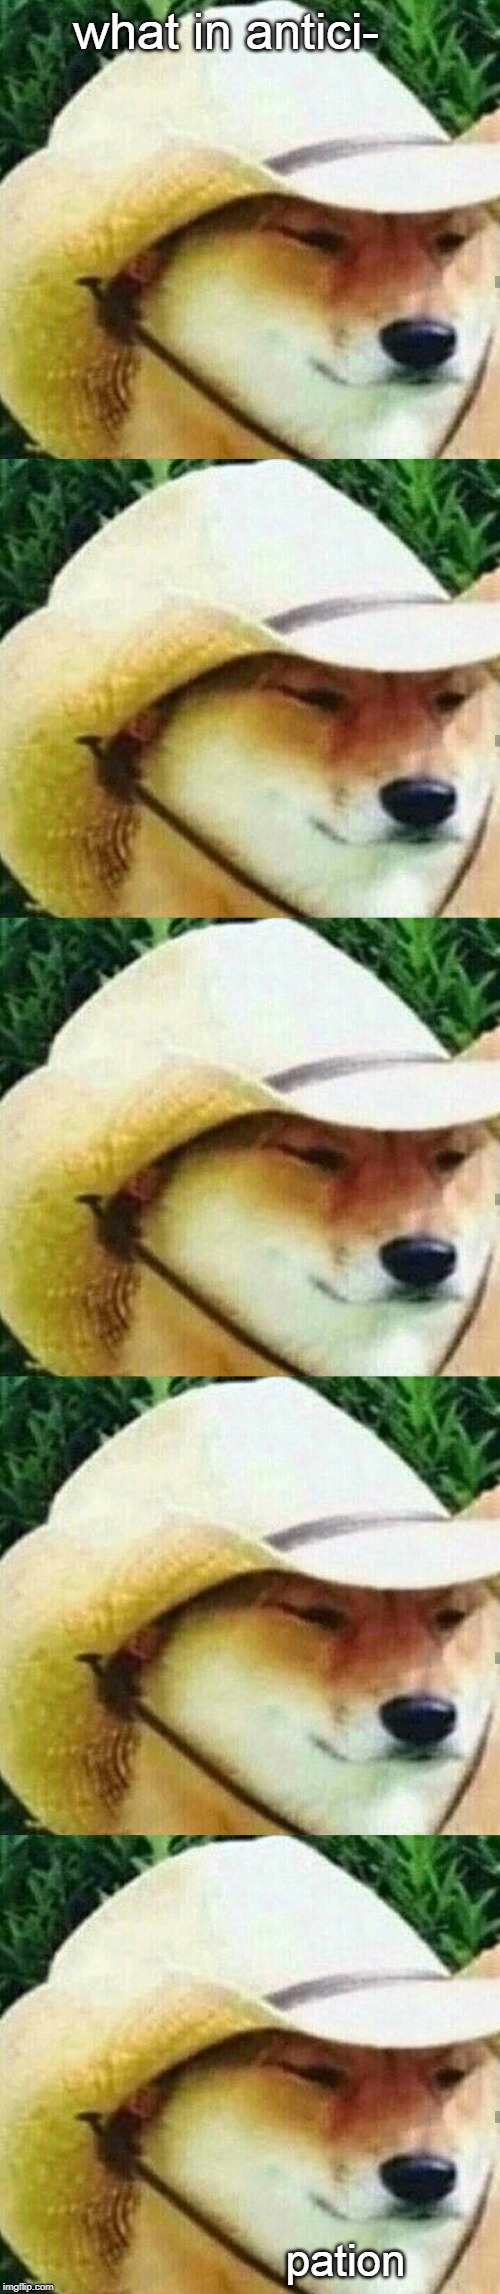 what in antici- pation | image tagged in what in tarnation | made w/ Imgflip meme maker